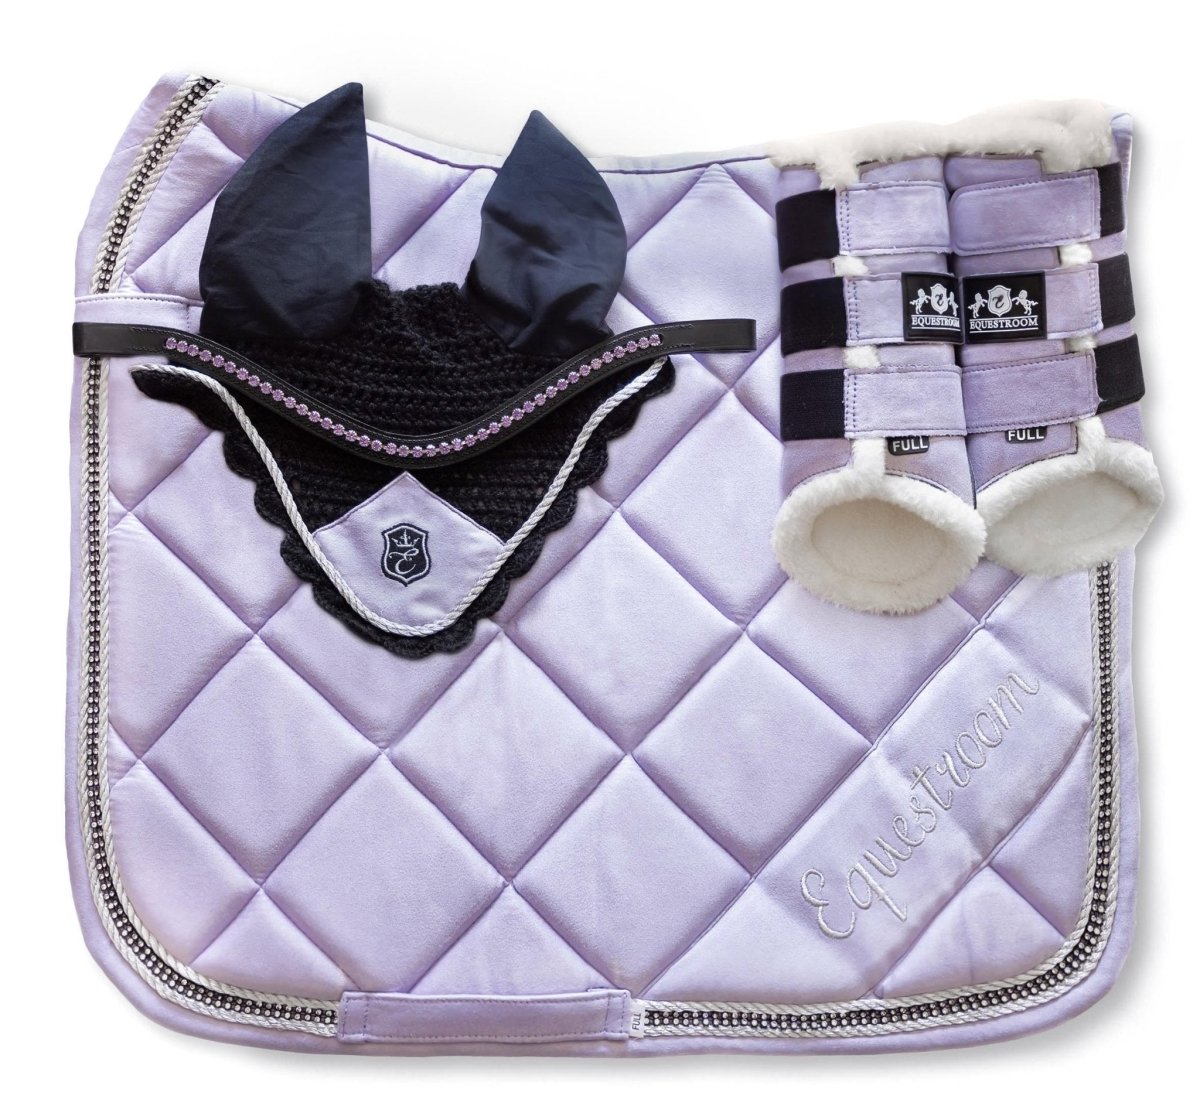 Frosted Lilac Saddle Pad Set - Equiluxe Tack